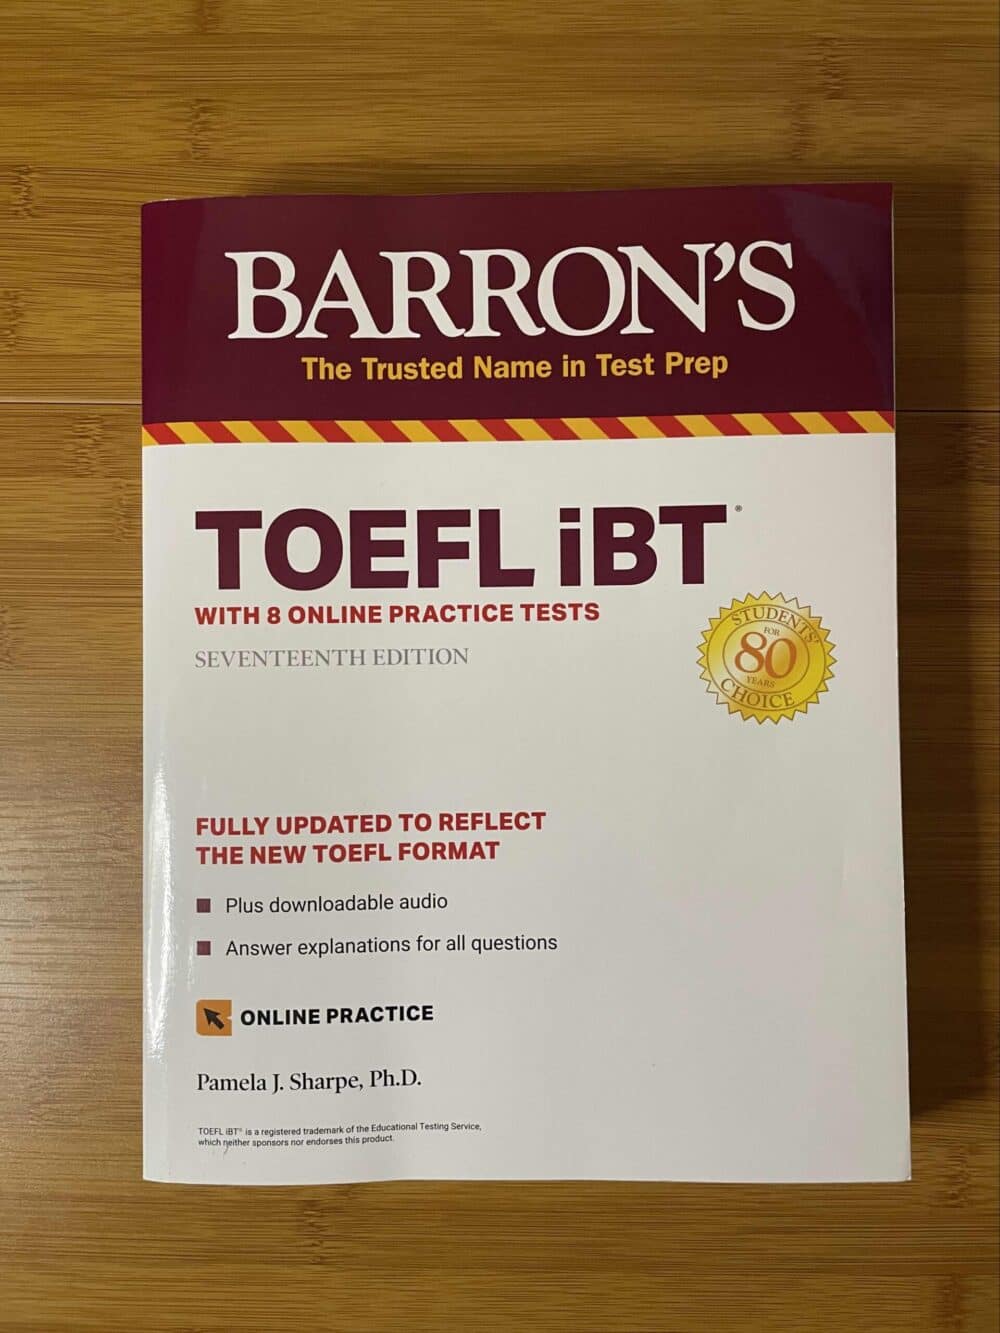 review-of-barron-s-toefl-ibt-with-8-online-practice-tests-17th-edition-sojourning-scholar